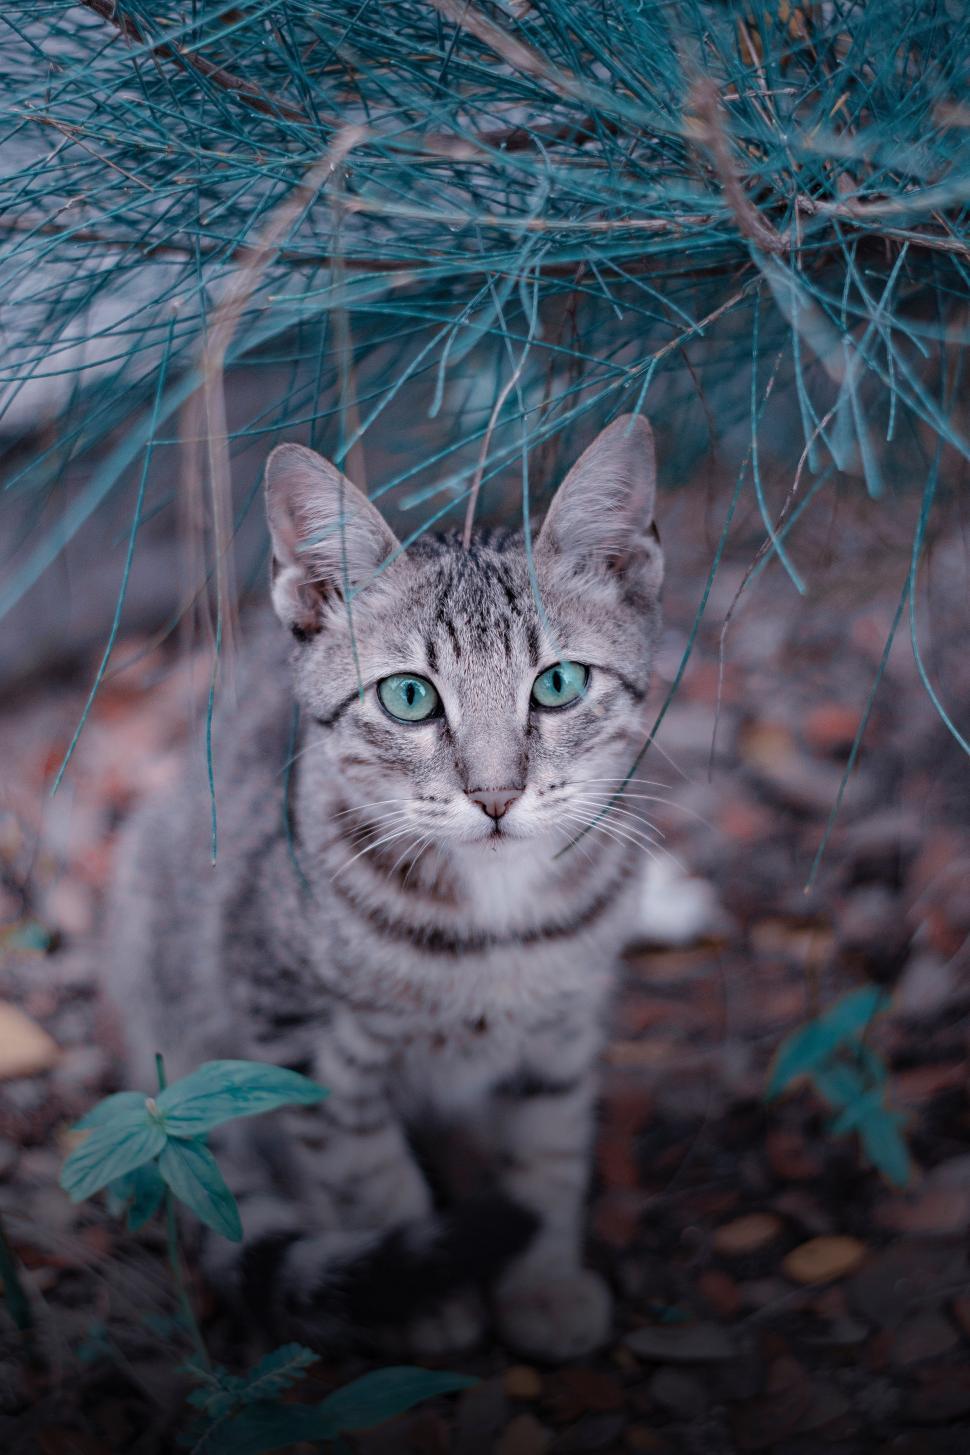 Free Image of cat feline domestic cat animal domestic animal tabby egyptian cat fur pet kitten domestic cute mammal whiskers tiger cat kitty pets eyes furry looking eye portrait animals striped hair face adorable breed grey look whisker nose curious purebred 